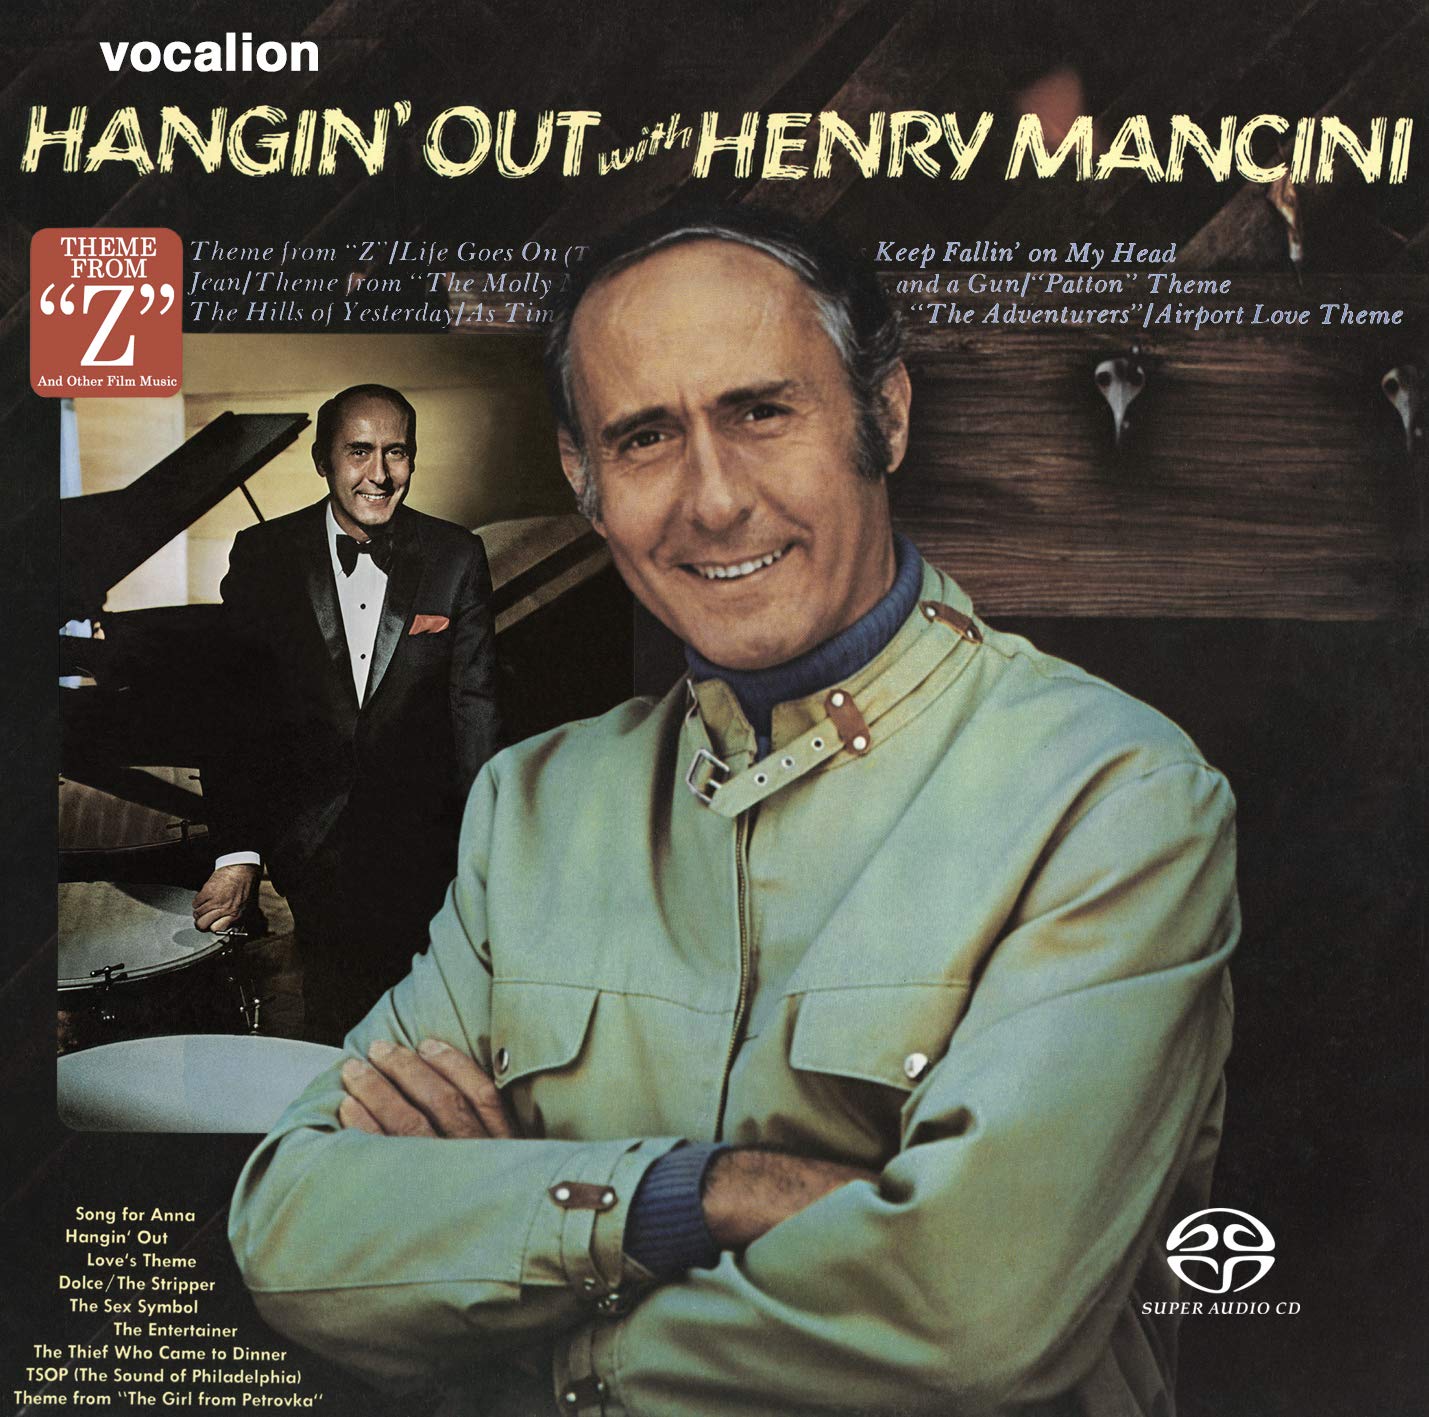 Henry Mancini – Hangin’ Out & Theme from Z (1974 & 1970) [Reissue 2019] MCH SACD ISO + Hi-Res FLAC